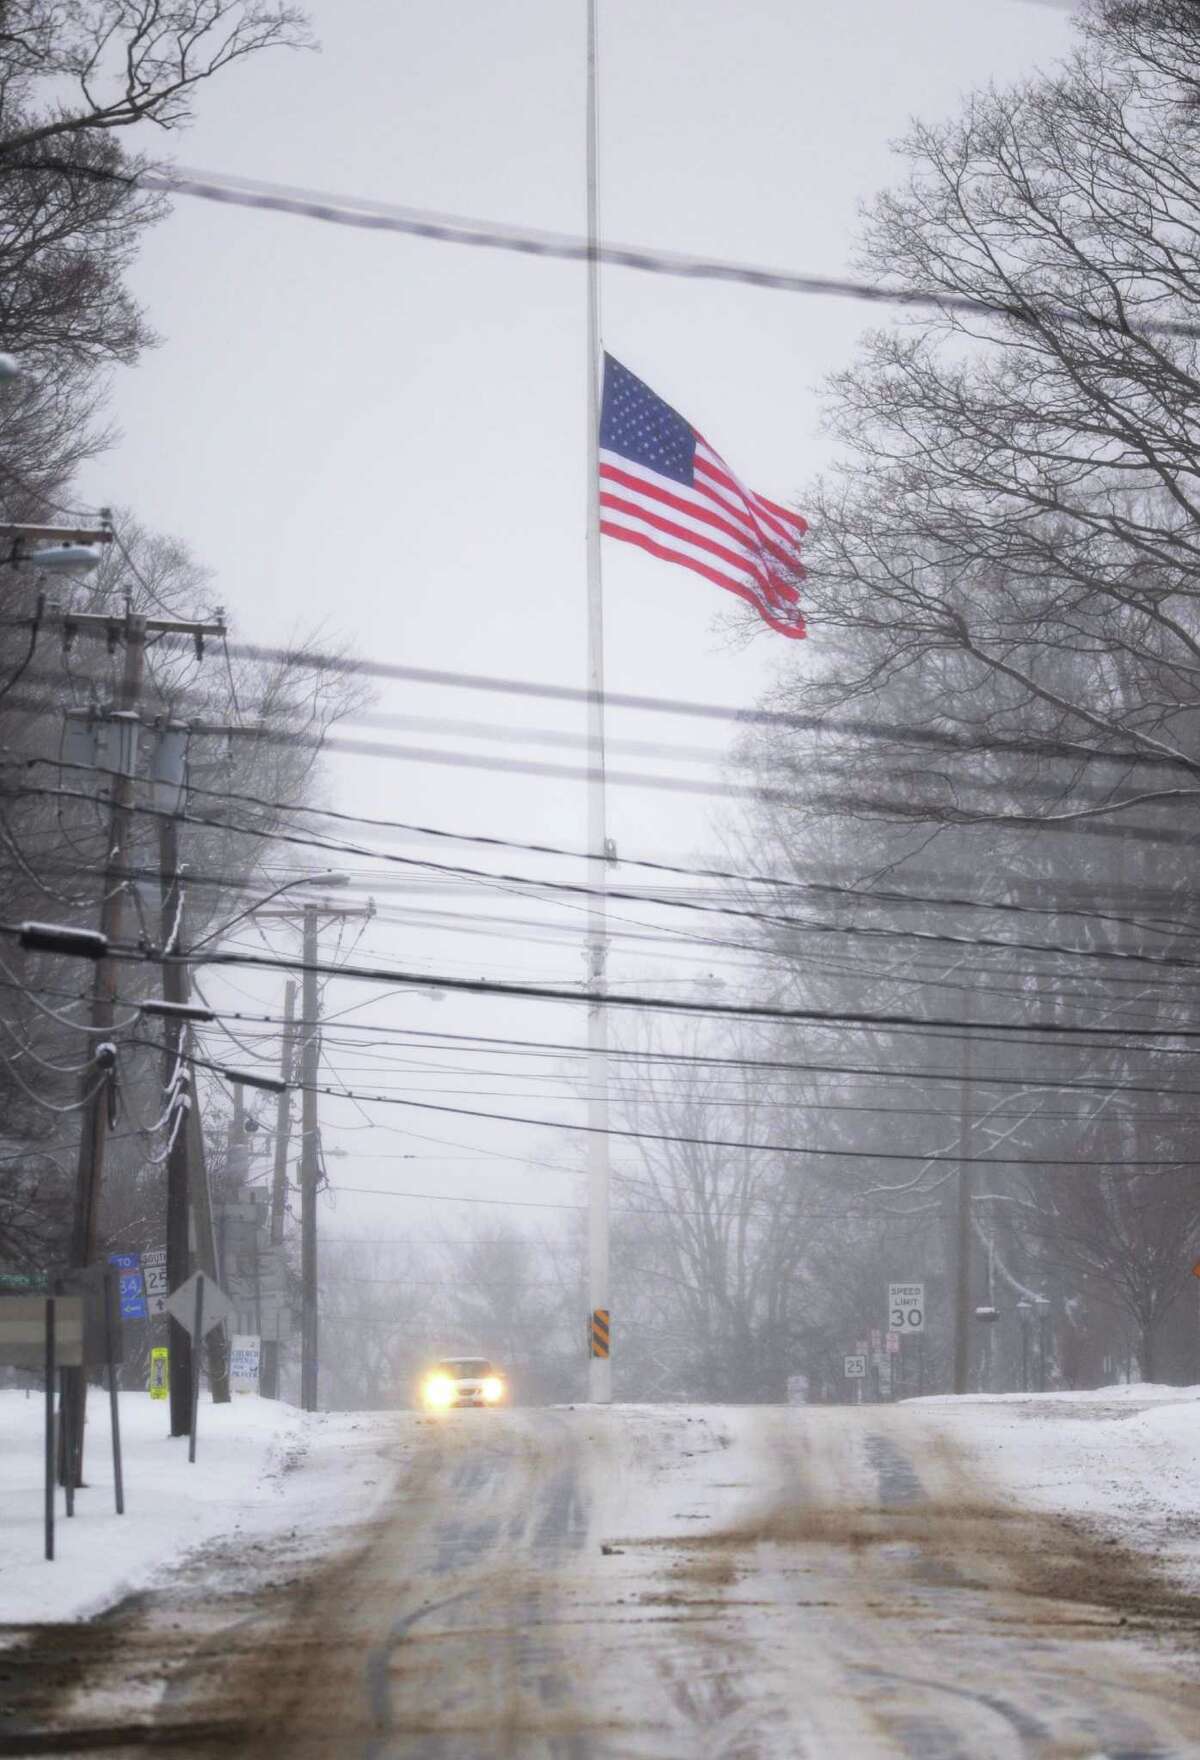 The flag at the intersection of Main Street and Church Hill Road in Newtown, Conn. is at half-staff on Saturday, Dec. 14, 2013, the one-year anniversary of the Sandy Hook Elementary School shooting that killed 26 students and educators. Snow fell on the town Saturday, casting a somber mood as residents remembered the tragedy one year ago.